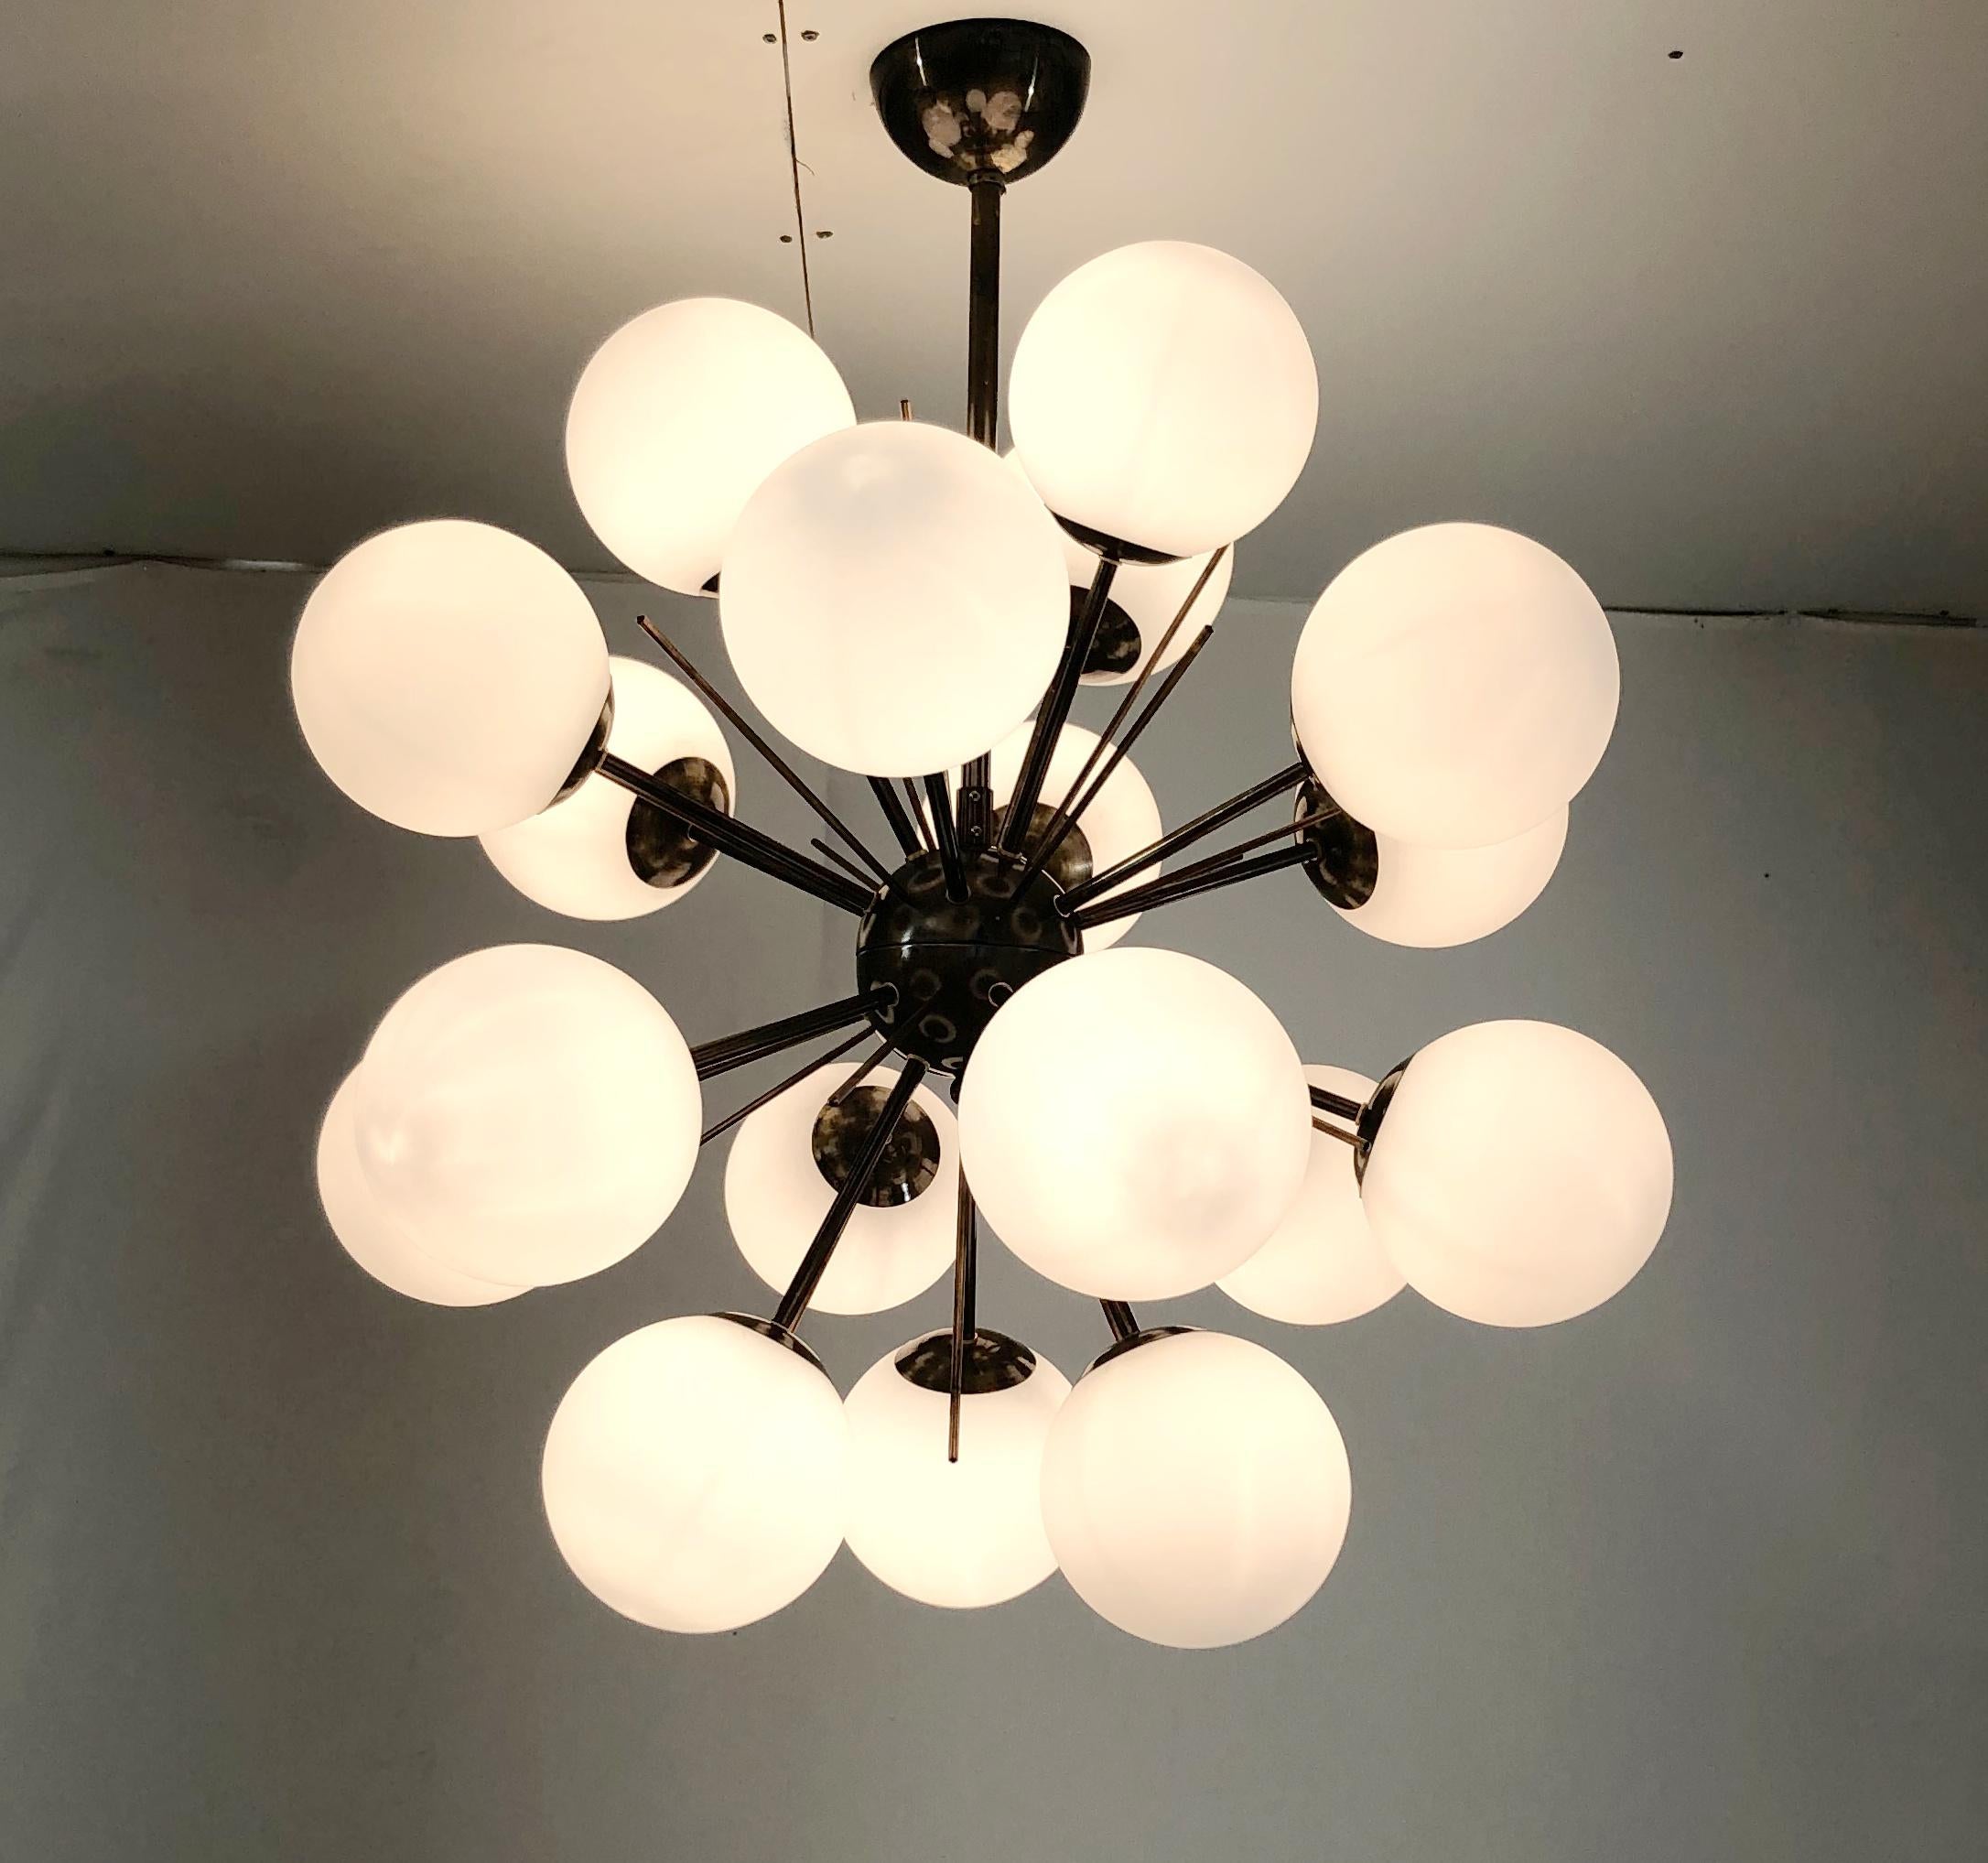 Italian sputnik chandelier with 18 Murano glass globes mounted on brass frame / Designed by Fabio Bergomi for Fabio Ltd / Made in Italy
18 lights / E12 or E14 type / max 40W each
Diameter: 29 inches / Height: 32 inches including rod and canopy
Order